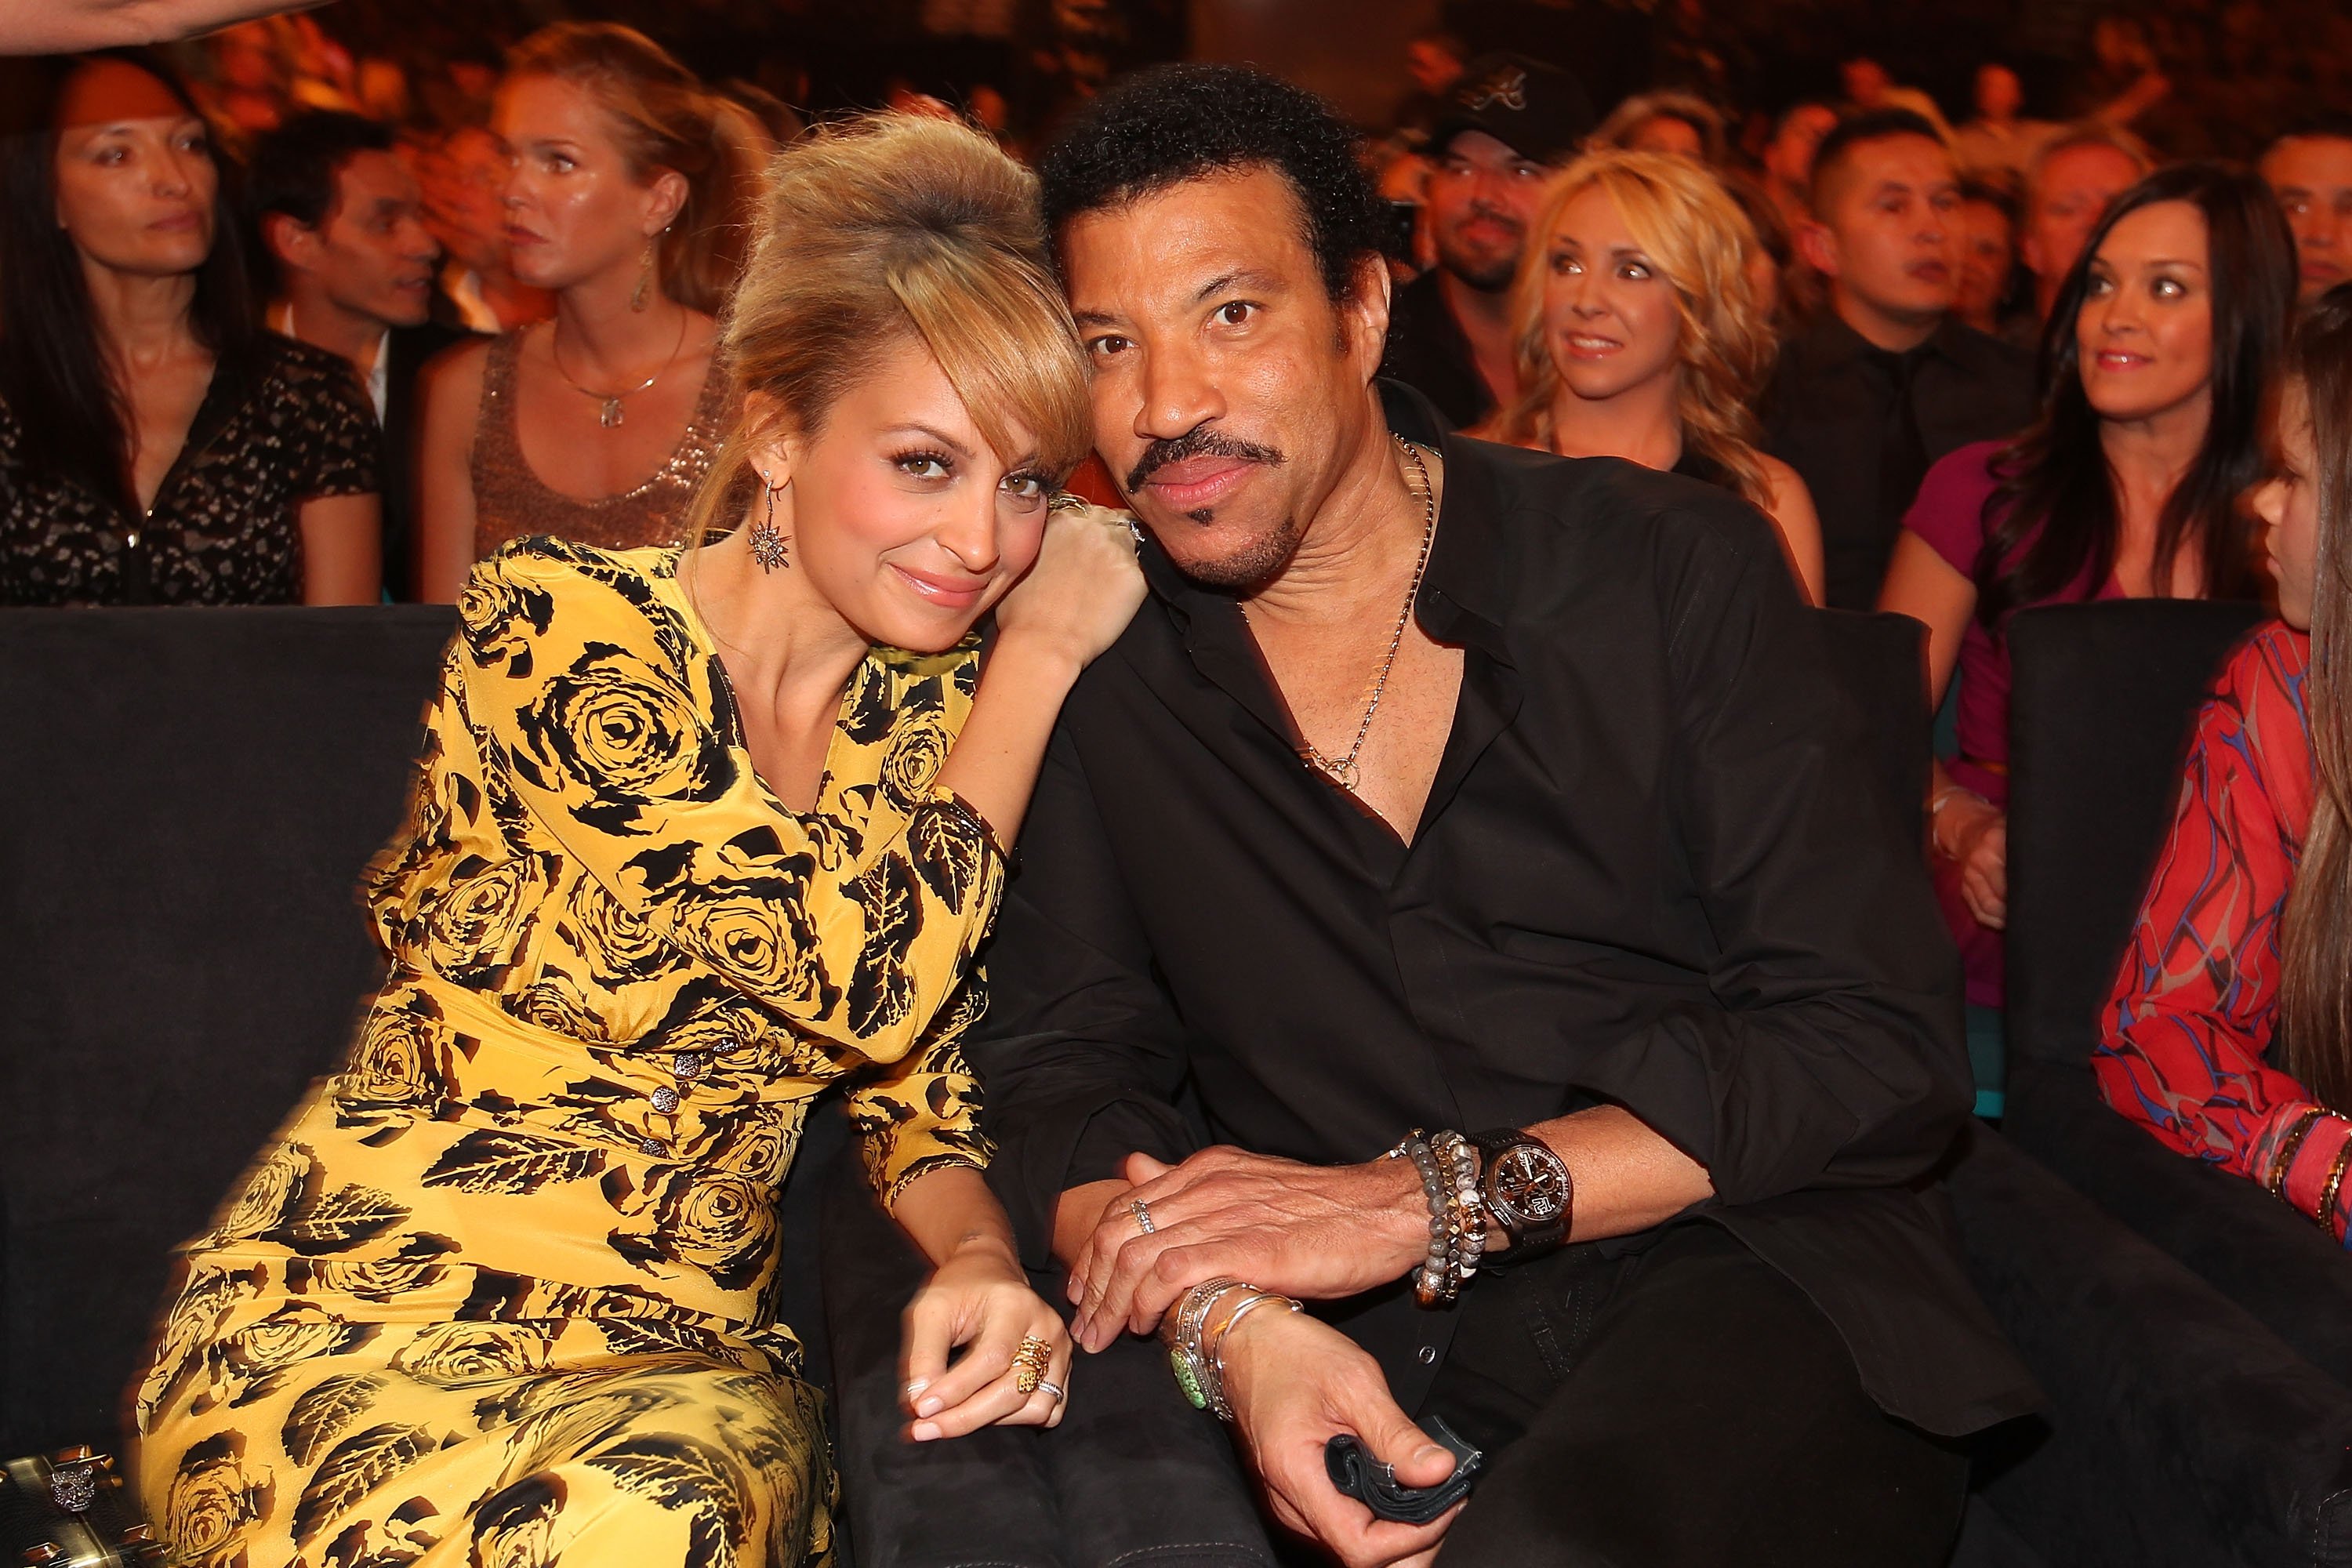 Nicole Richie and Lionel Richie attend Lionel Richie and Friends in Concert on April 2, 2012, in Las Vegas, Nevada. | Source: Getty Images.